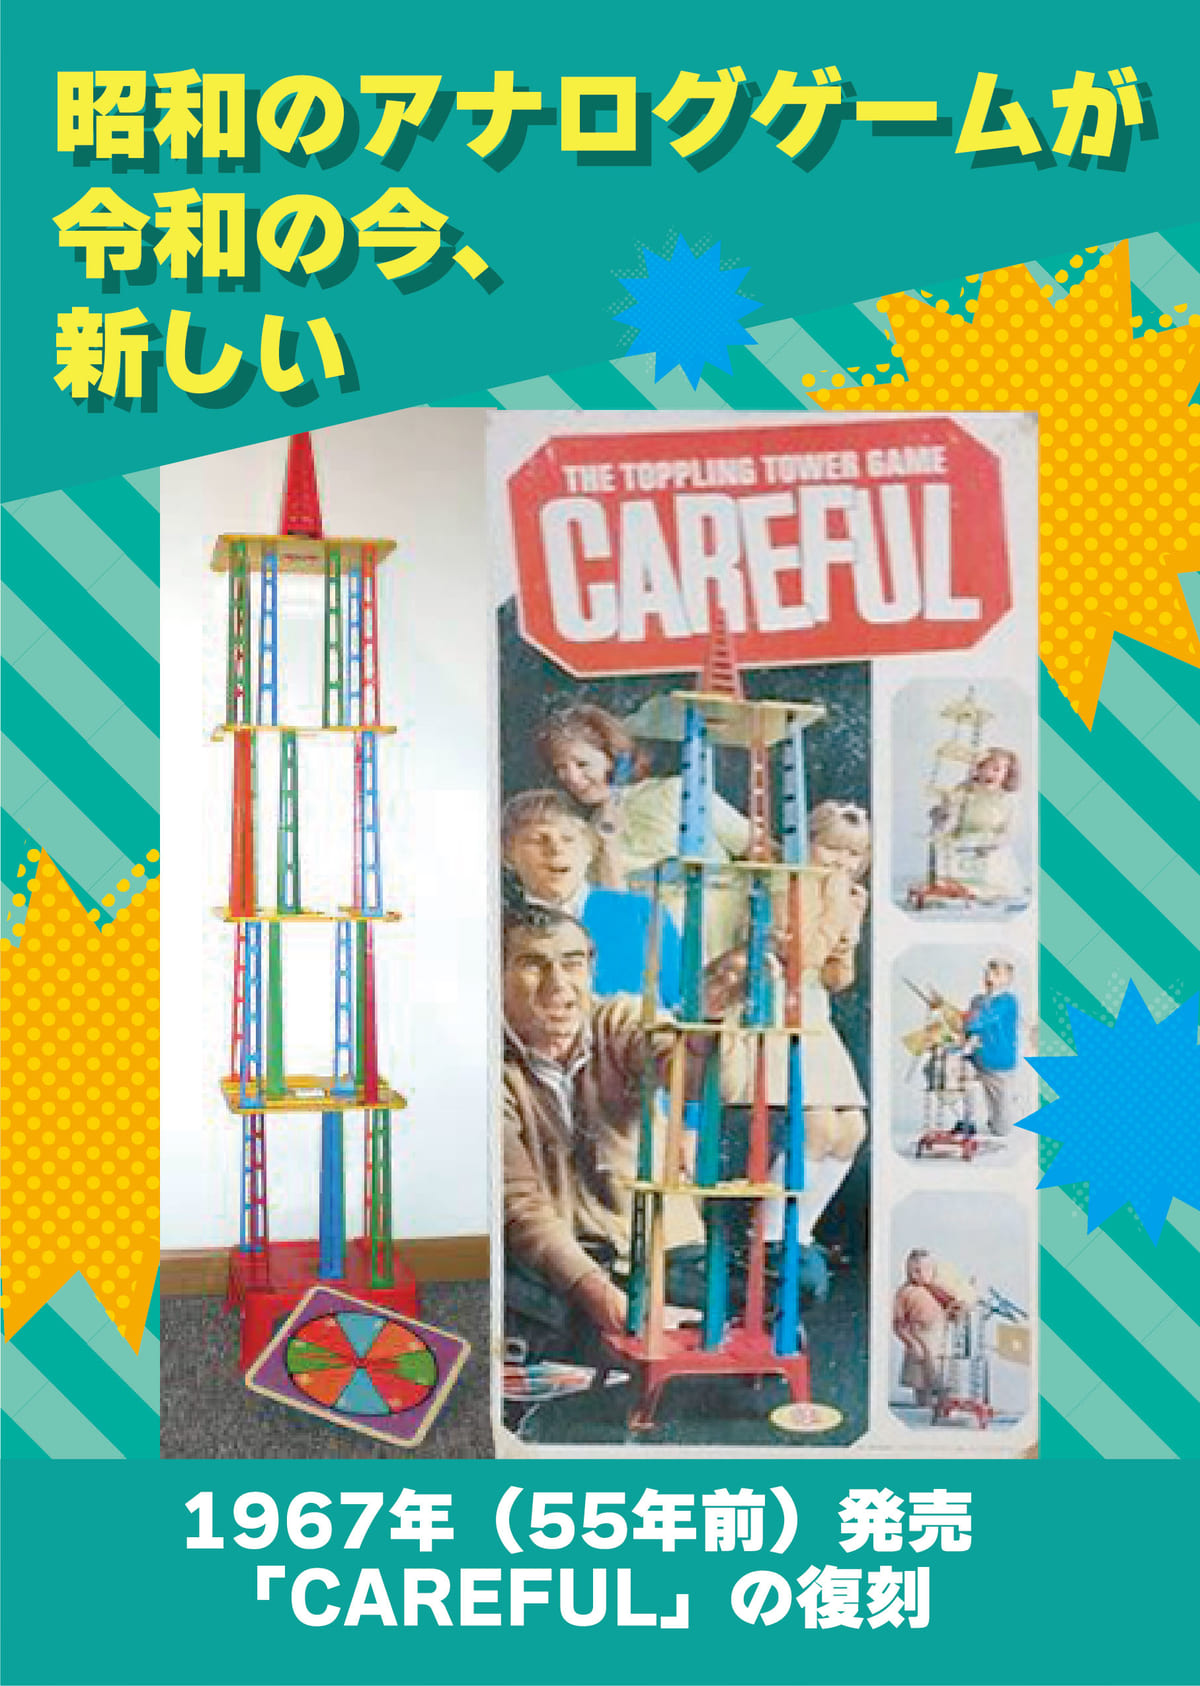 CAREFUL:The Toppling Tower Game